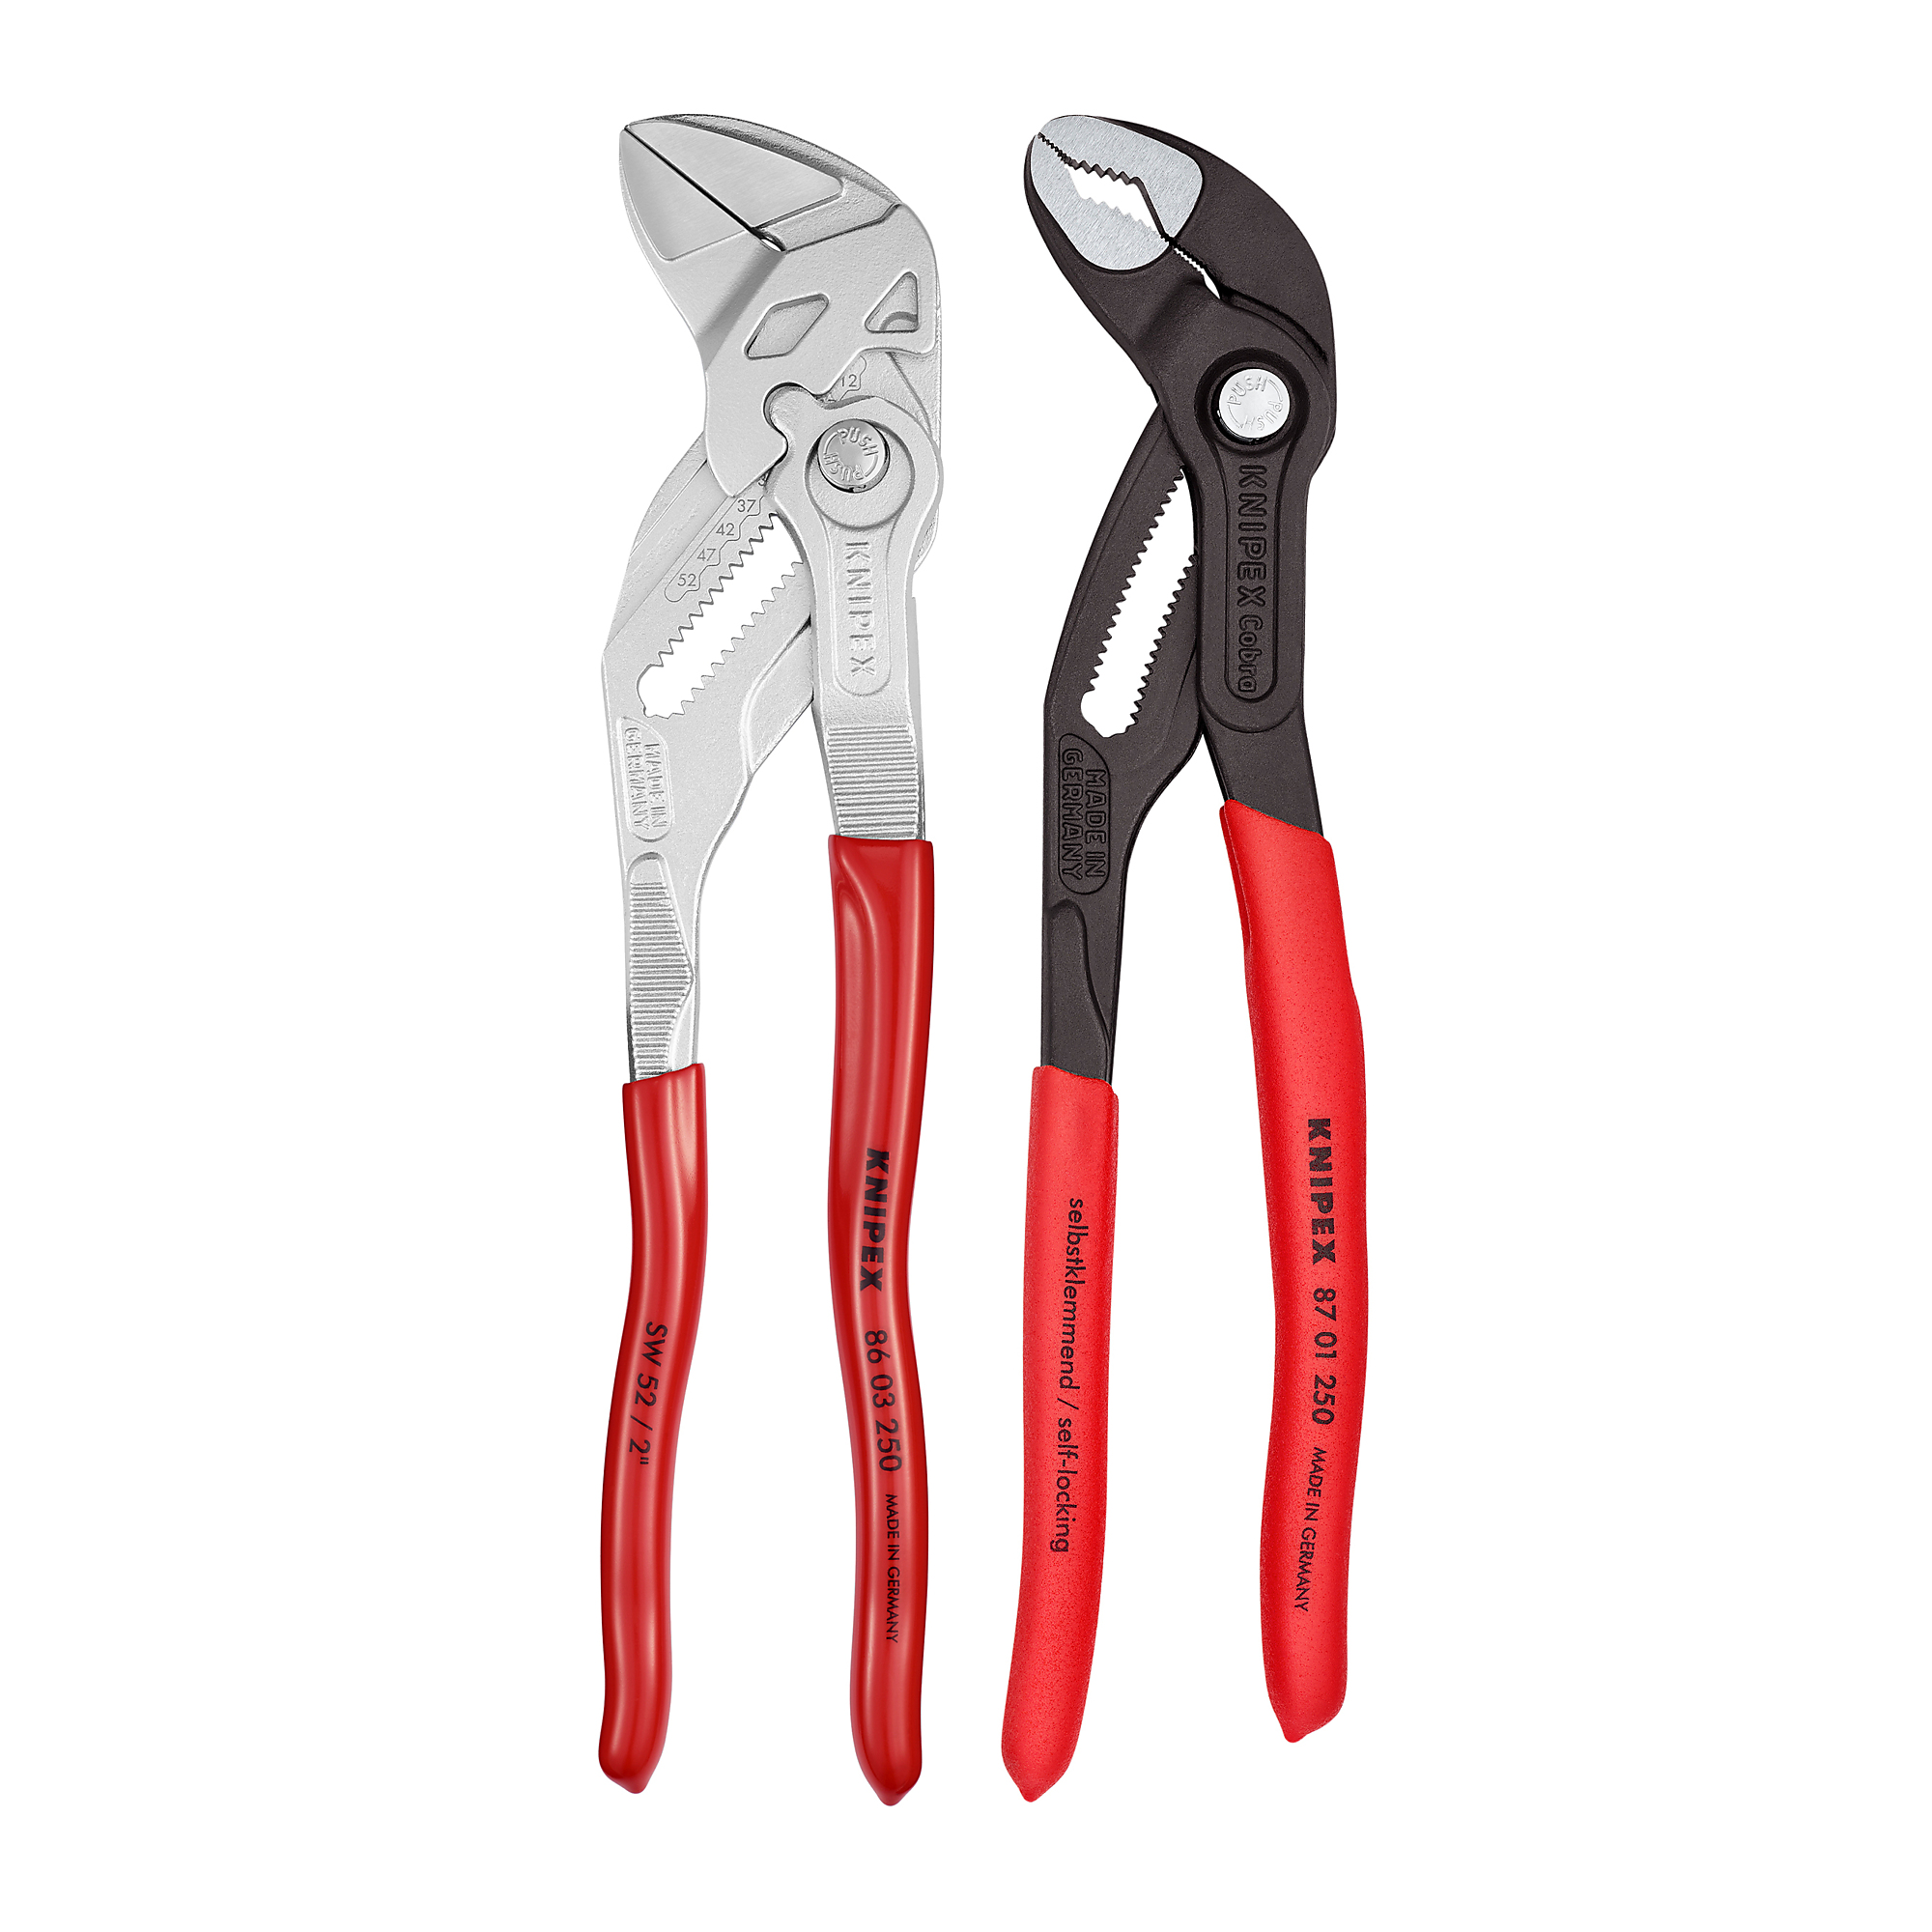 KNIPEX Cobra , Cobra Water Pump and Pliers Wrench Set, 2 Pc, Pieces (qty.) 2 Material Steel, Model 9K 00 80 147 US